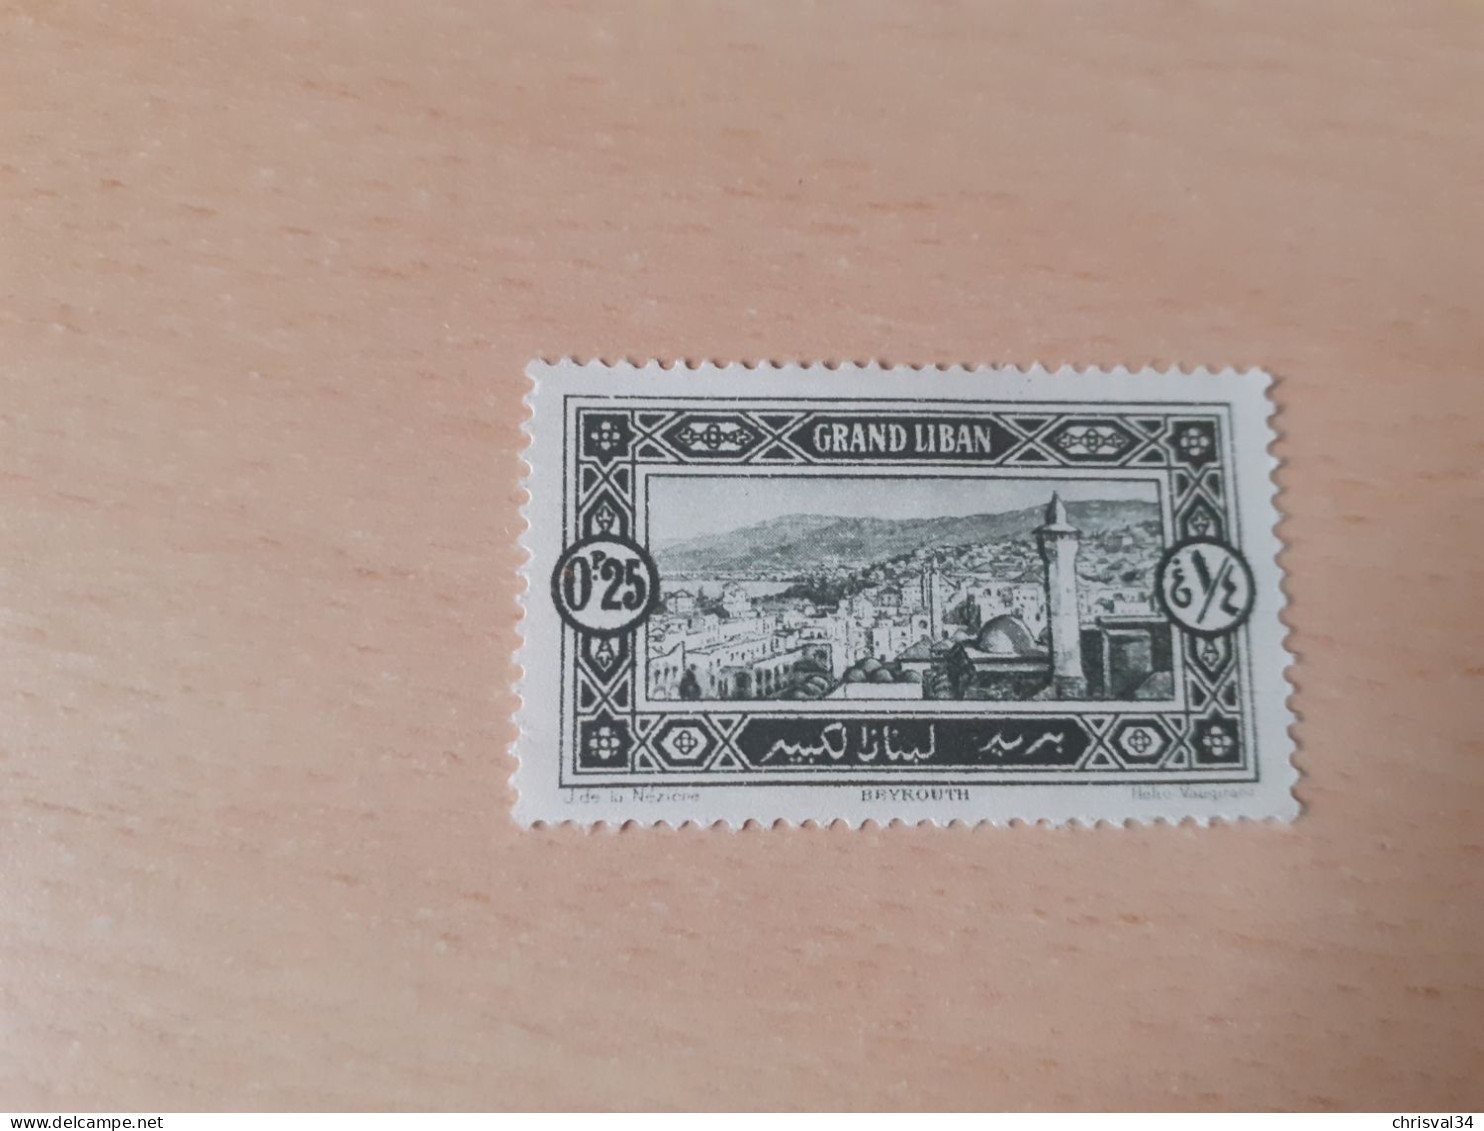 TIMBRE   GRAND  LIBAN       N  51       COTE  0,75  EUROS    NEUF  TRACE  CHARNIERE - Unused Stamps